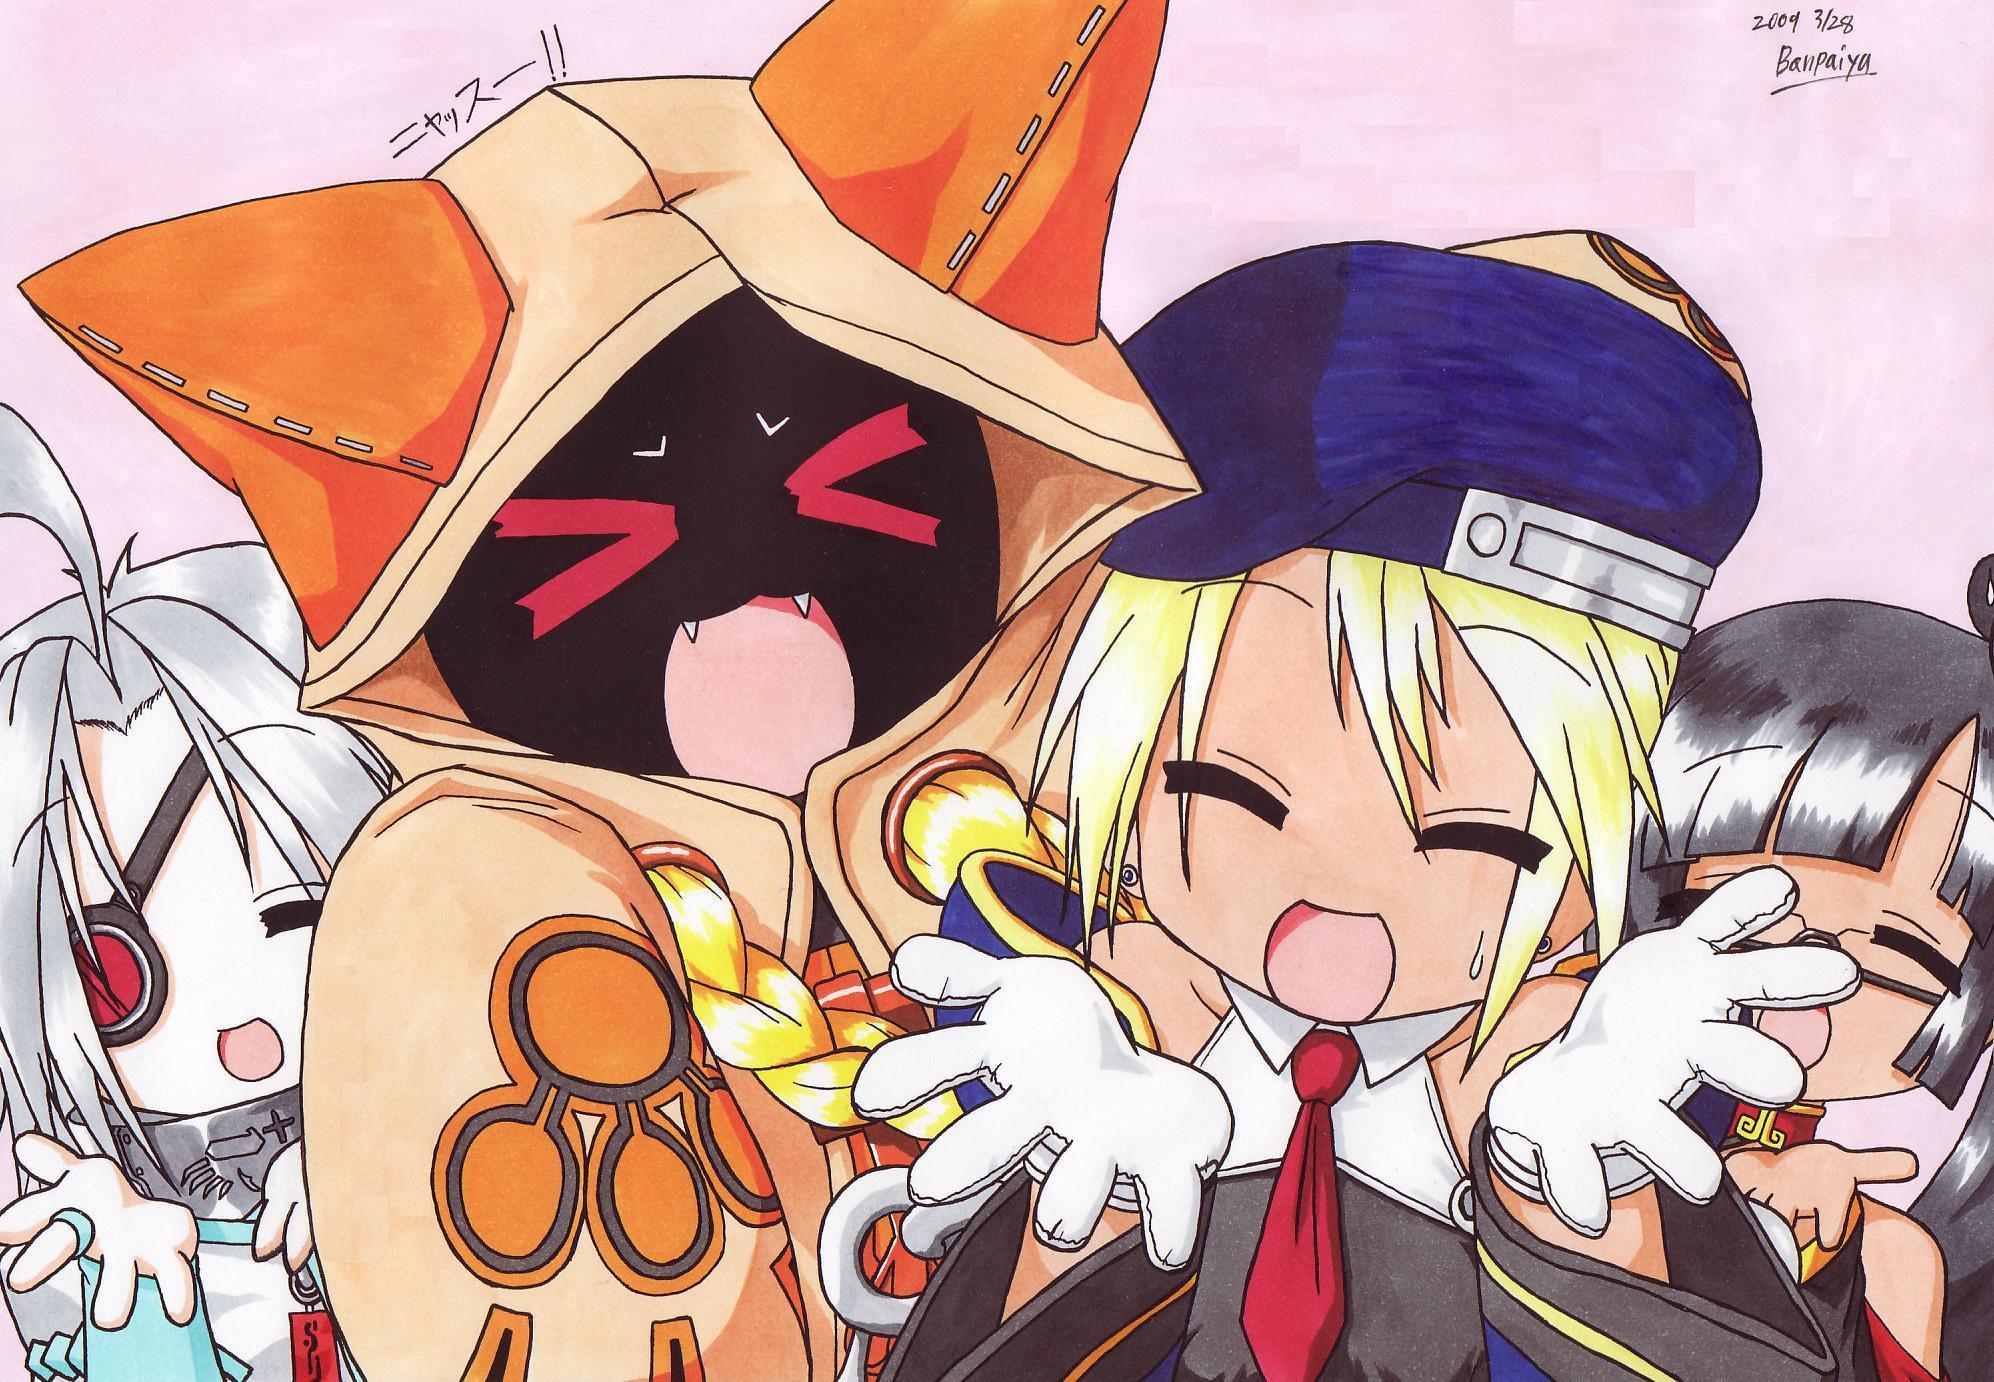 Anime characters Lucky Star and Taokaka from Blazblue in a desktop wallpaper.